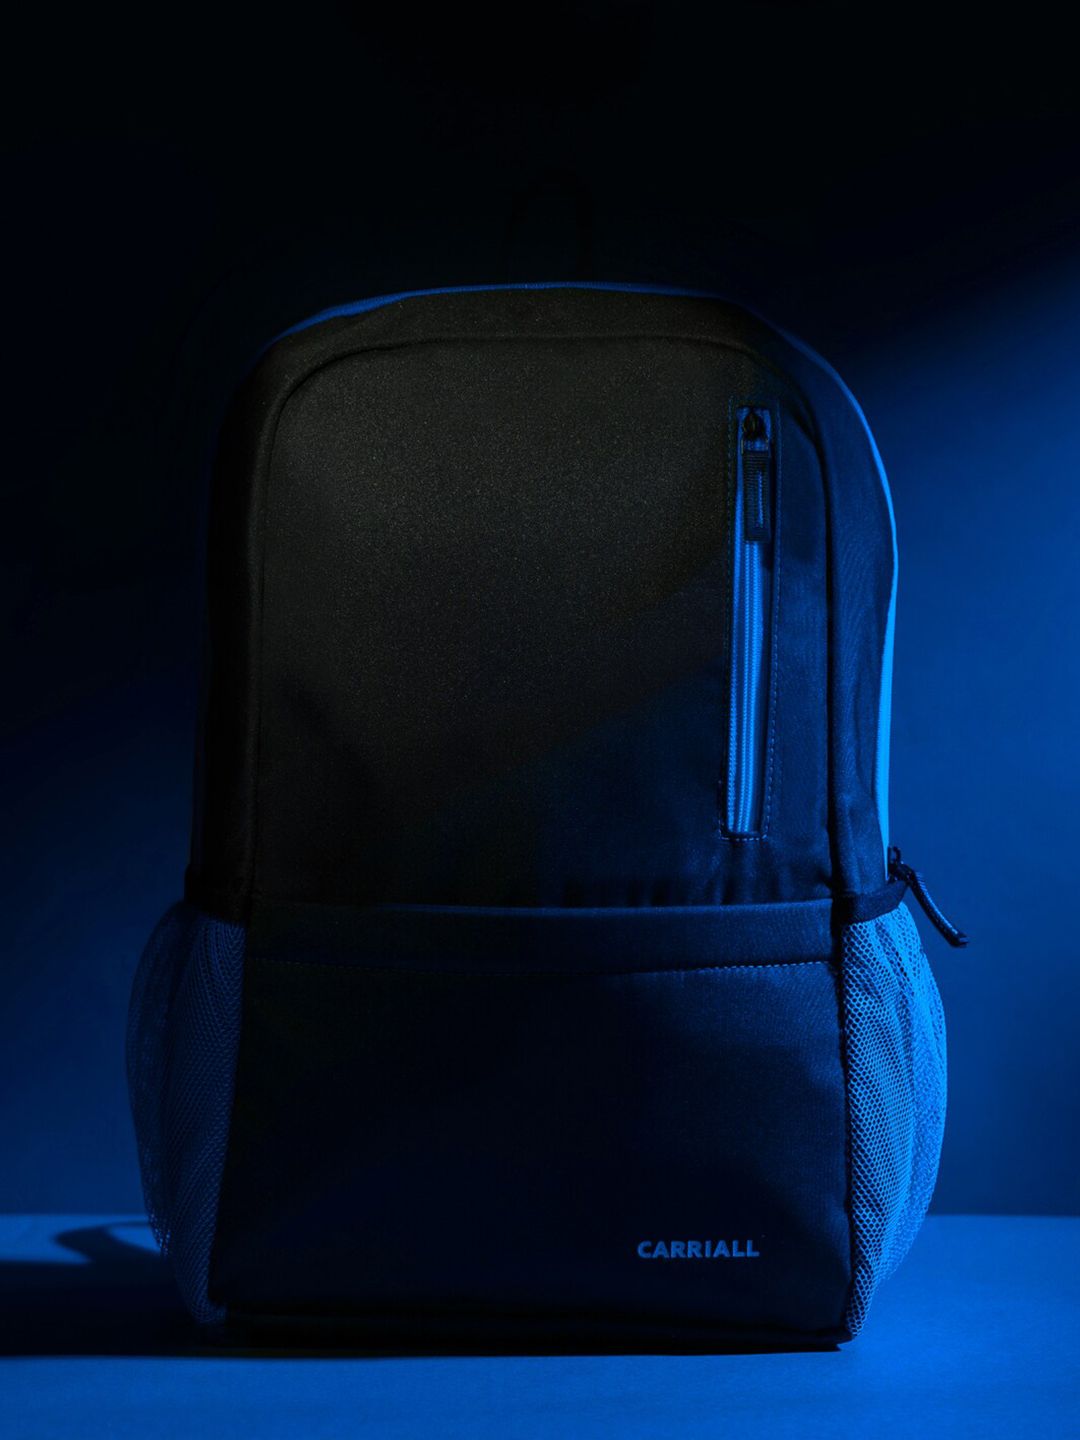 CARRIALL Unisex Black & Blue Backpack with Reflective Strip Price in India